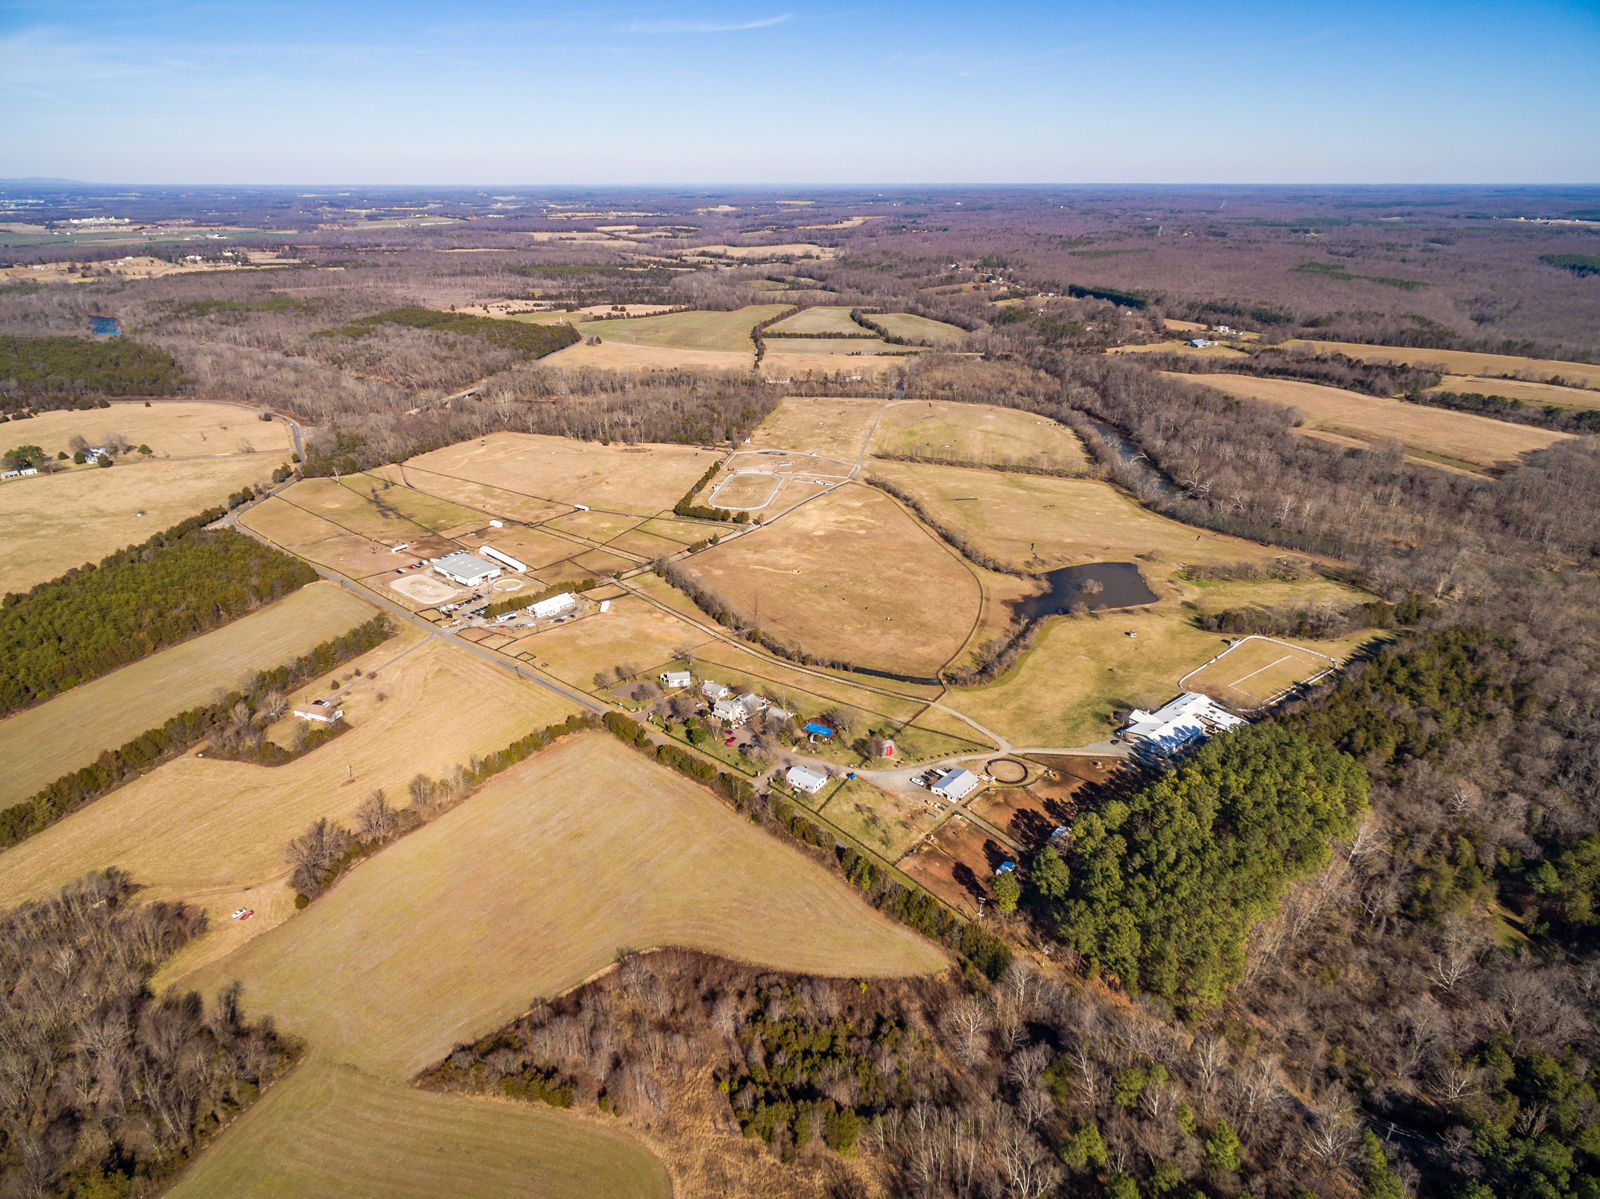 The Inn at Kelly’s Ford, a 138-acre inn and equestrian center in Remington, Virginia, will be auctioned off to the highest bidder at an Absolute Auction on Nov. 16. (Courtesy Auction Markets LLC)